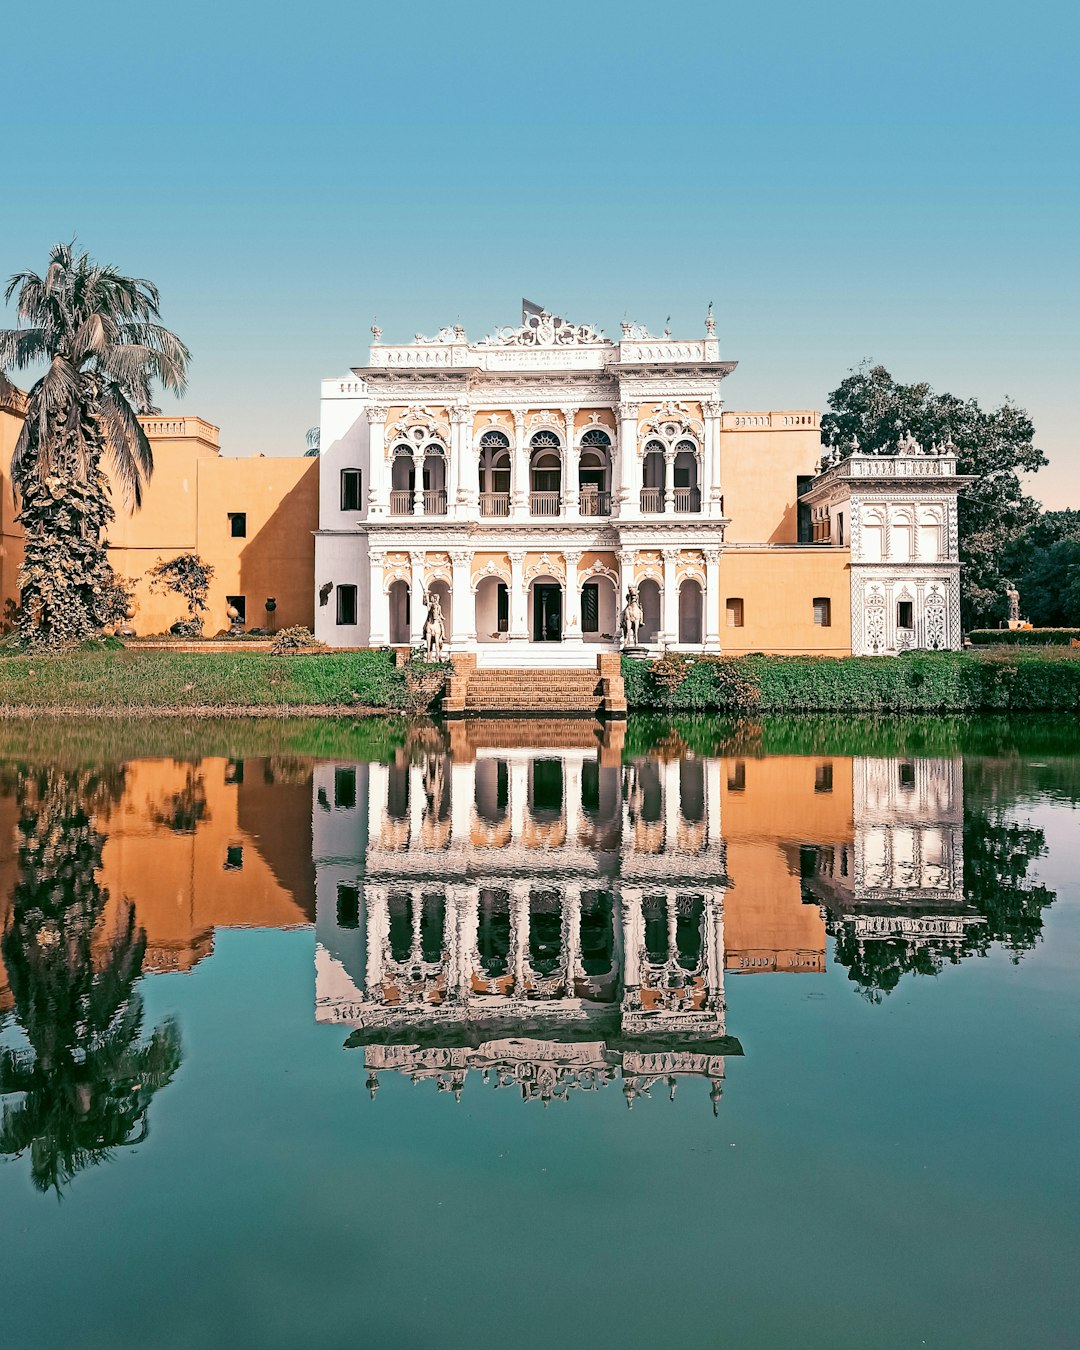 Travel Tips and Stories of Sonargaon in Bangladesh